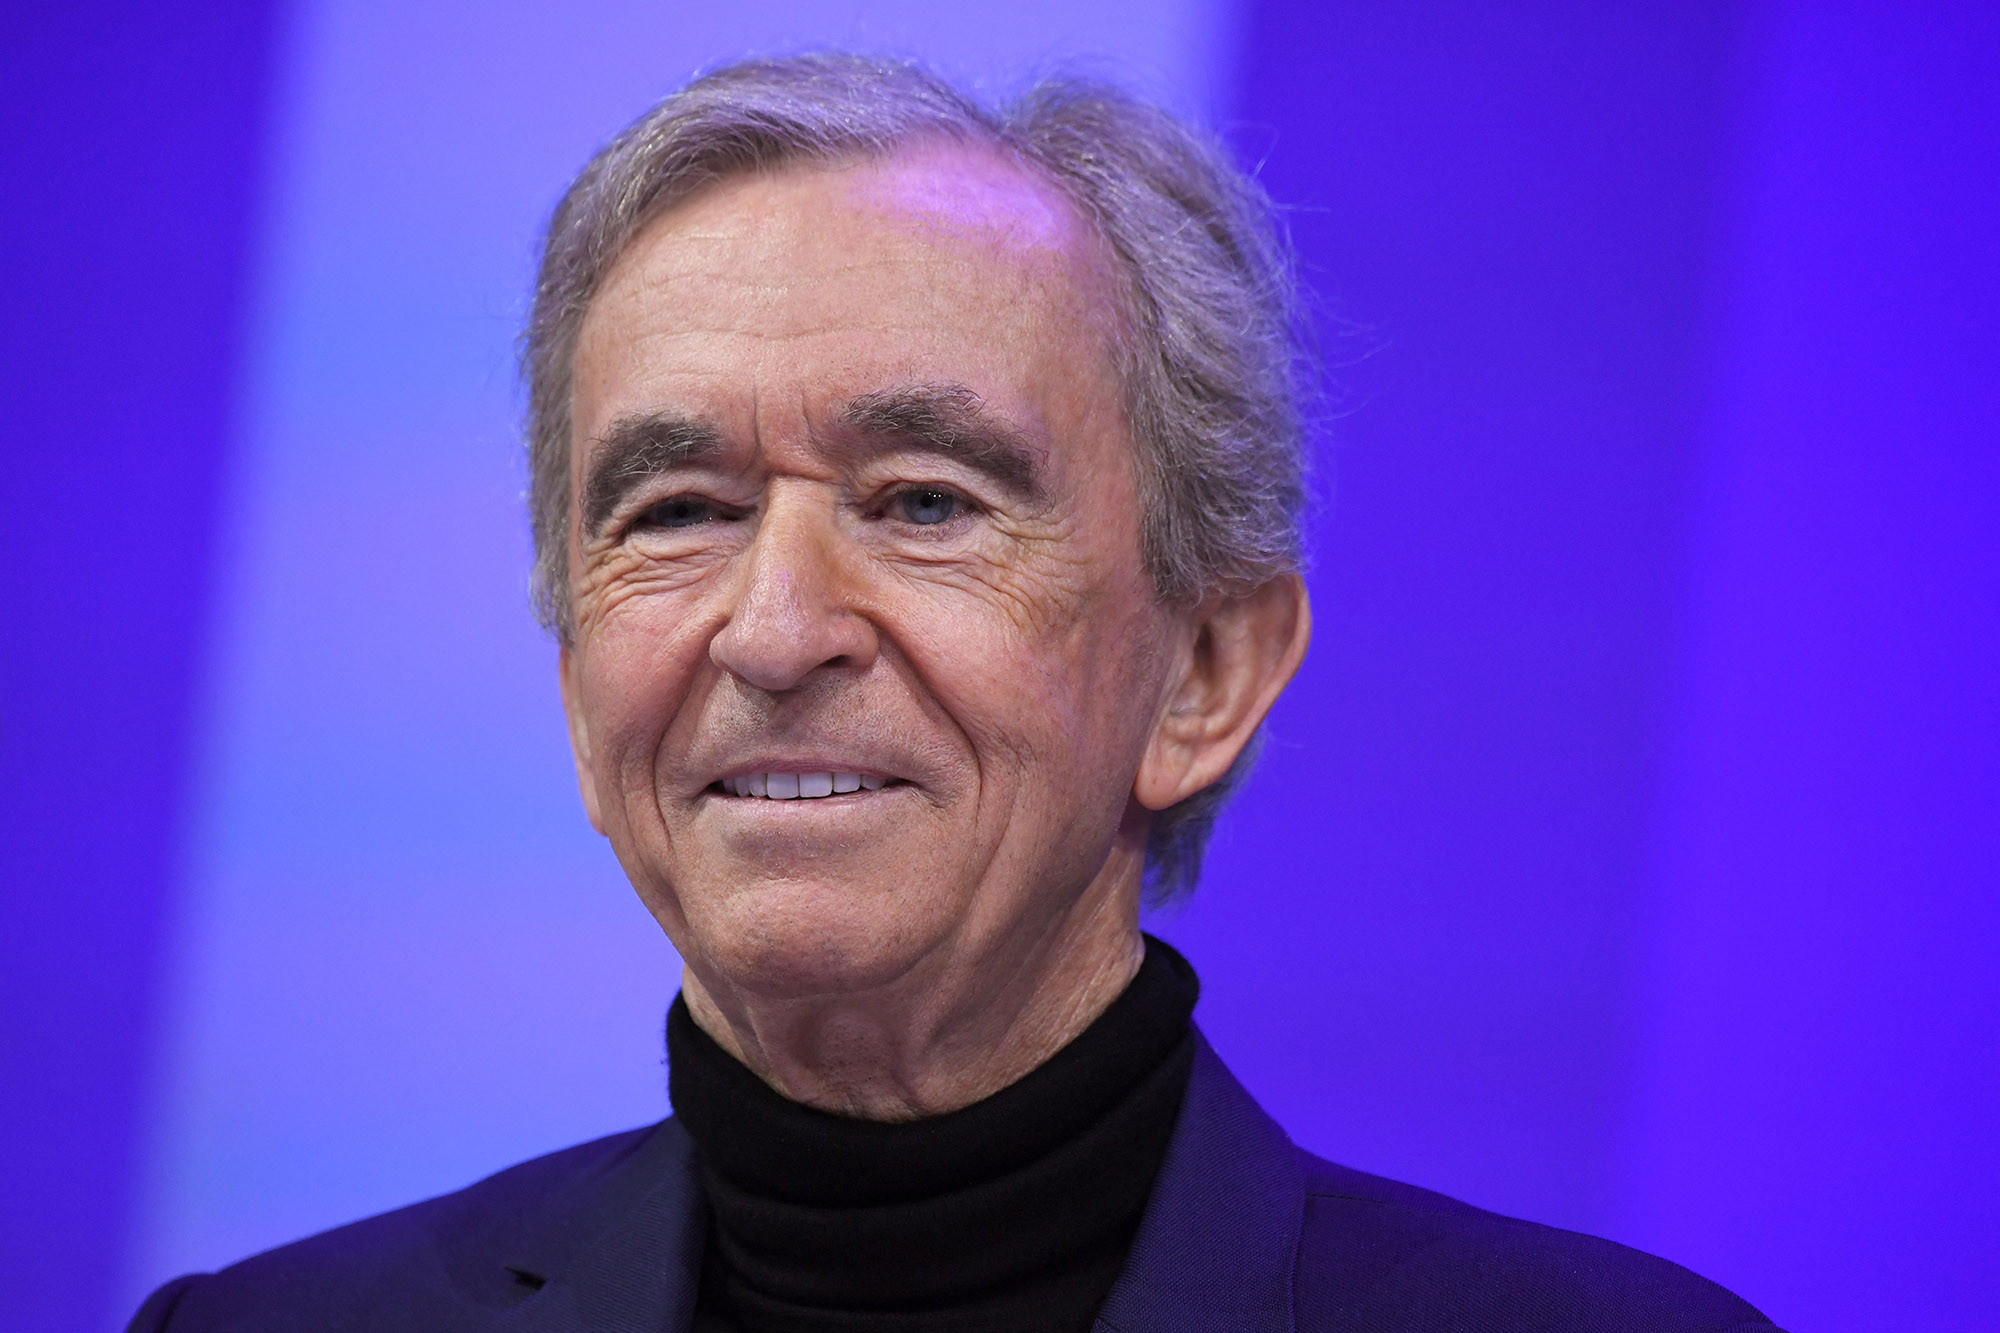 LVMH CEO Bernard Arnault recently sold his private aircraft so no